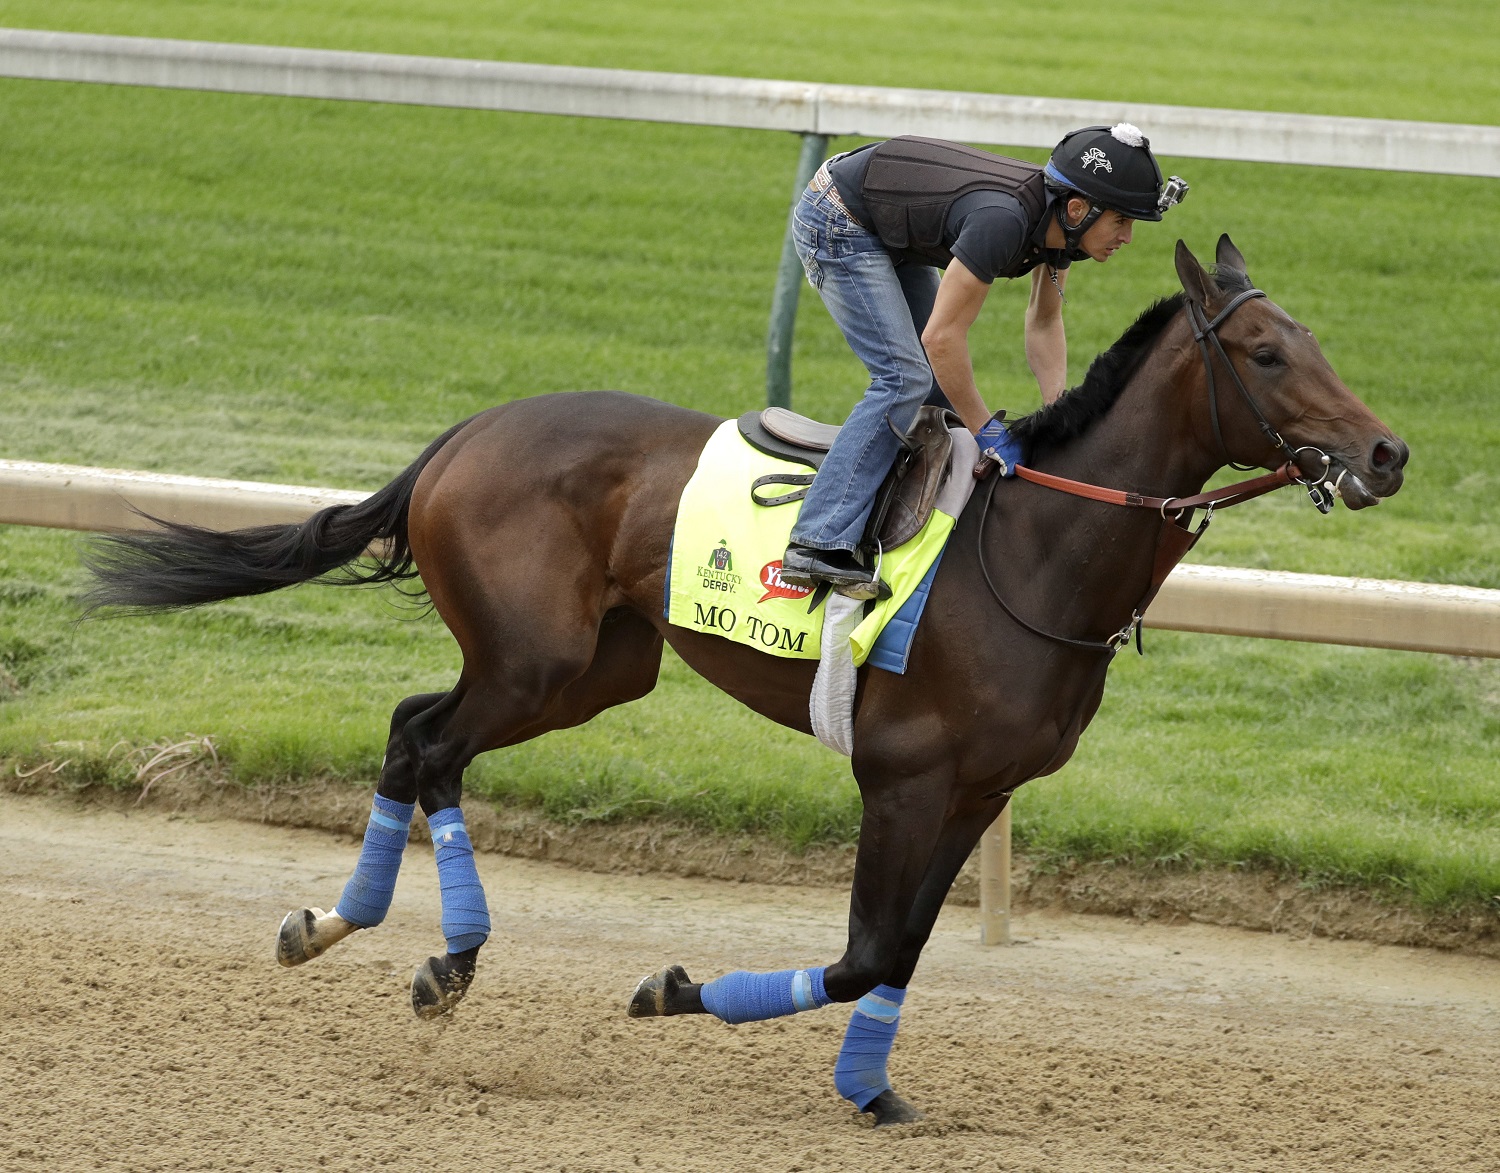 Exercise rider Mario Garcia rides Kentucky Derby hopeful Mo Tom during a workout at Churchill Downs Tuesday, May 3, 2016, in Louisville, Ky. The 142nd running of the Kentucky Derby is scheduled for Saturday, May 7. (AP Photo/Charlie Riedel)